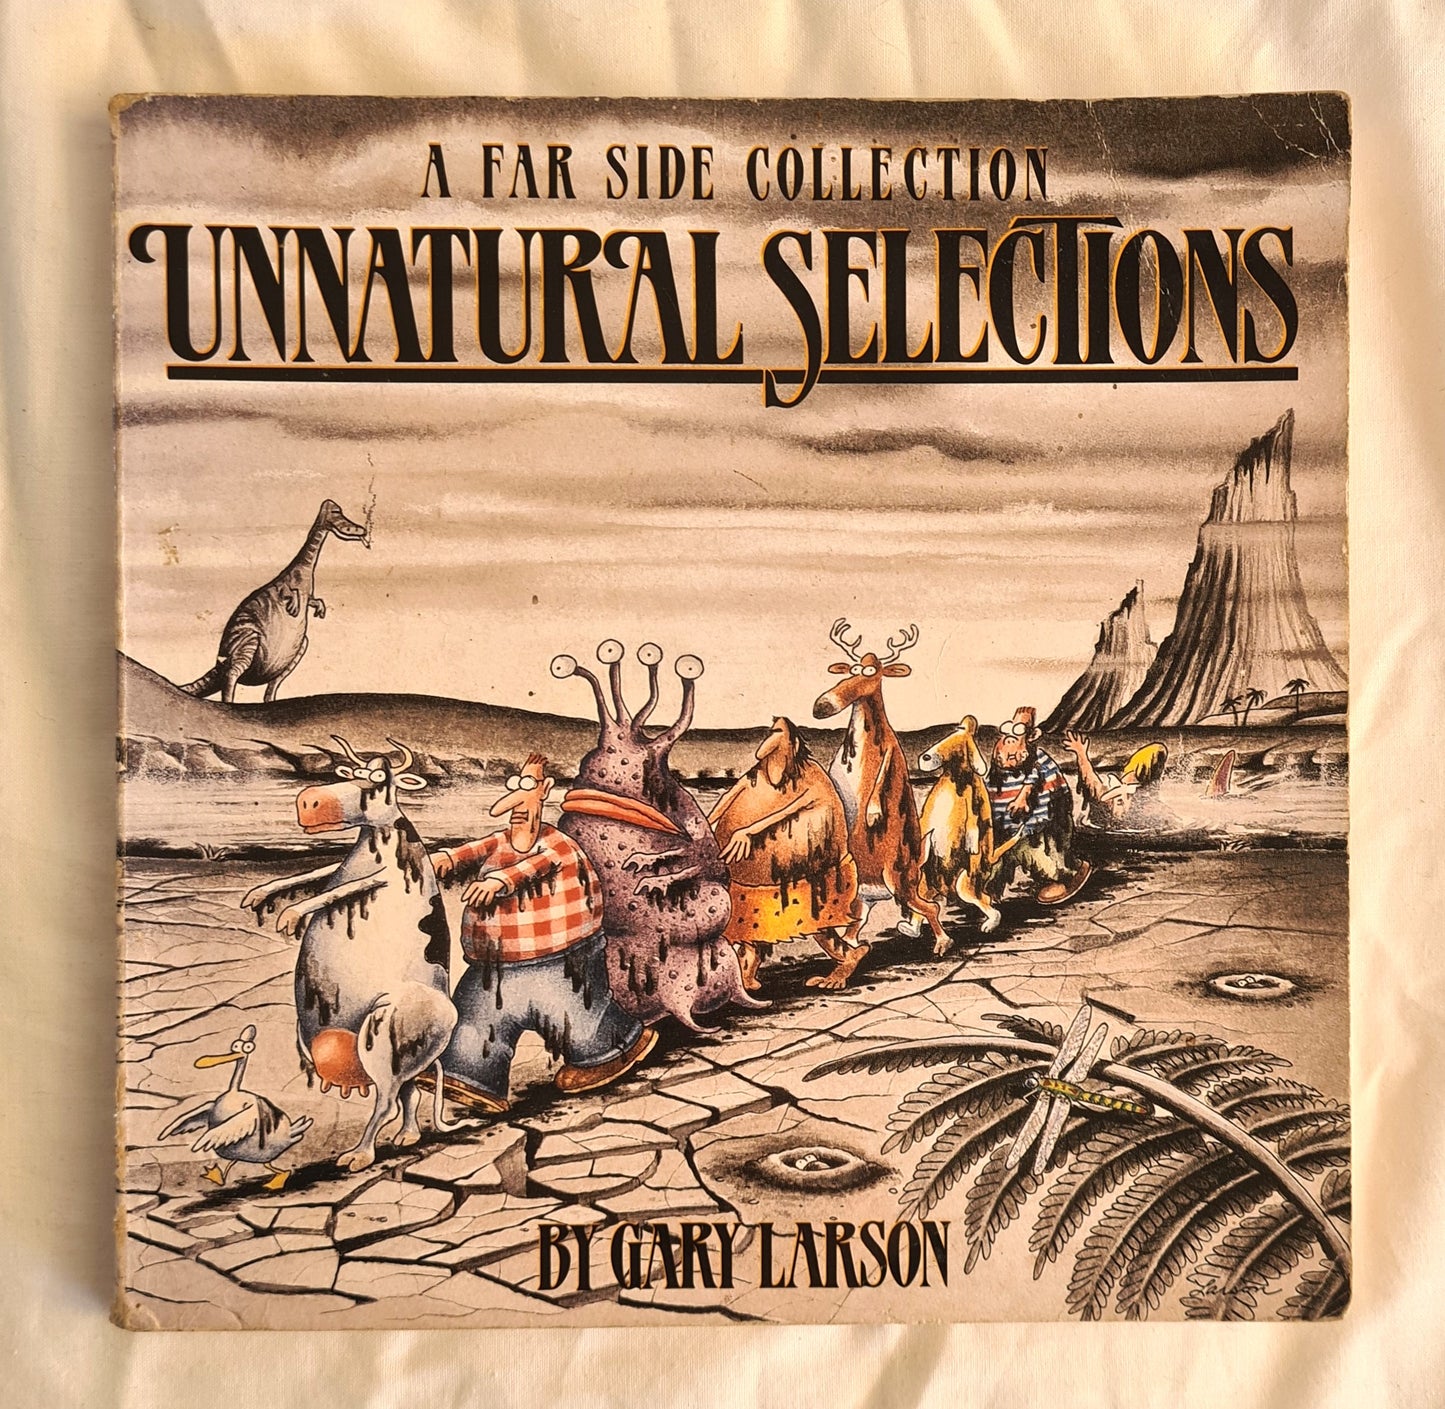 Unnatural Selections  A Far Side Collection  by Gary Larson